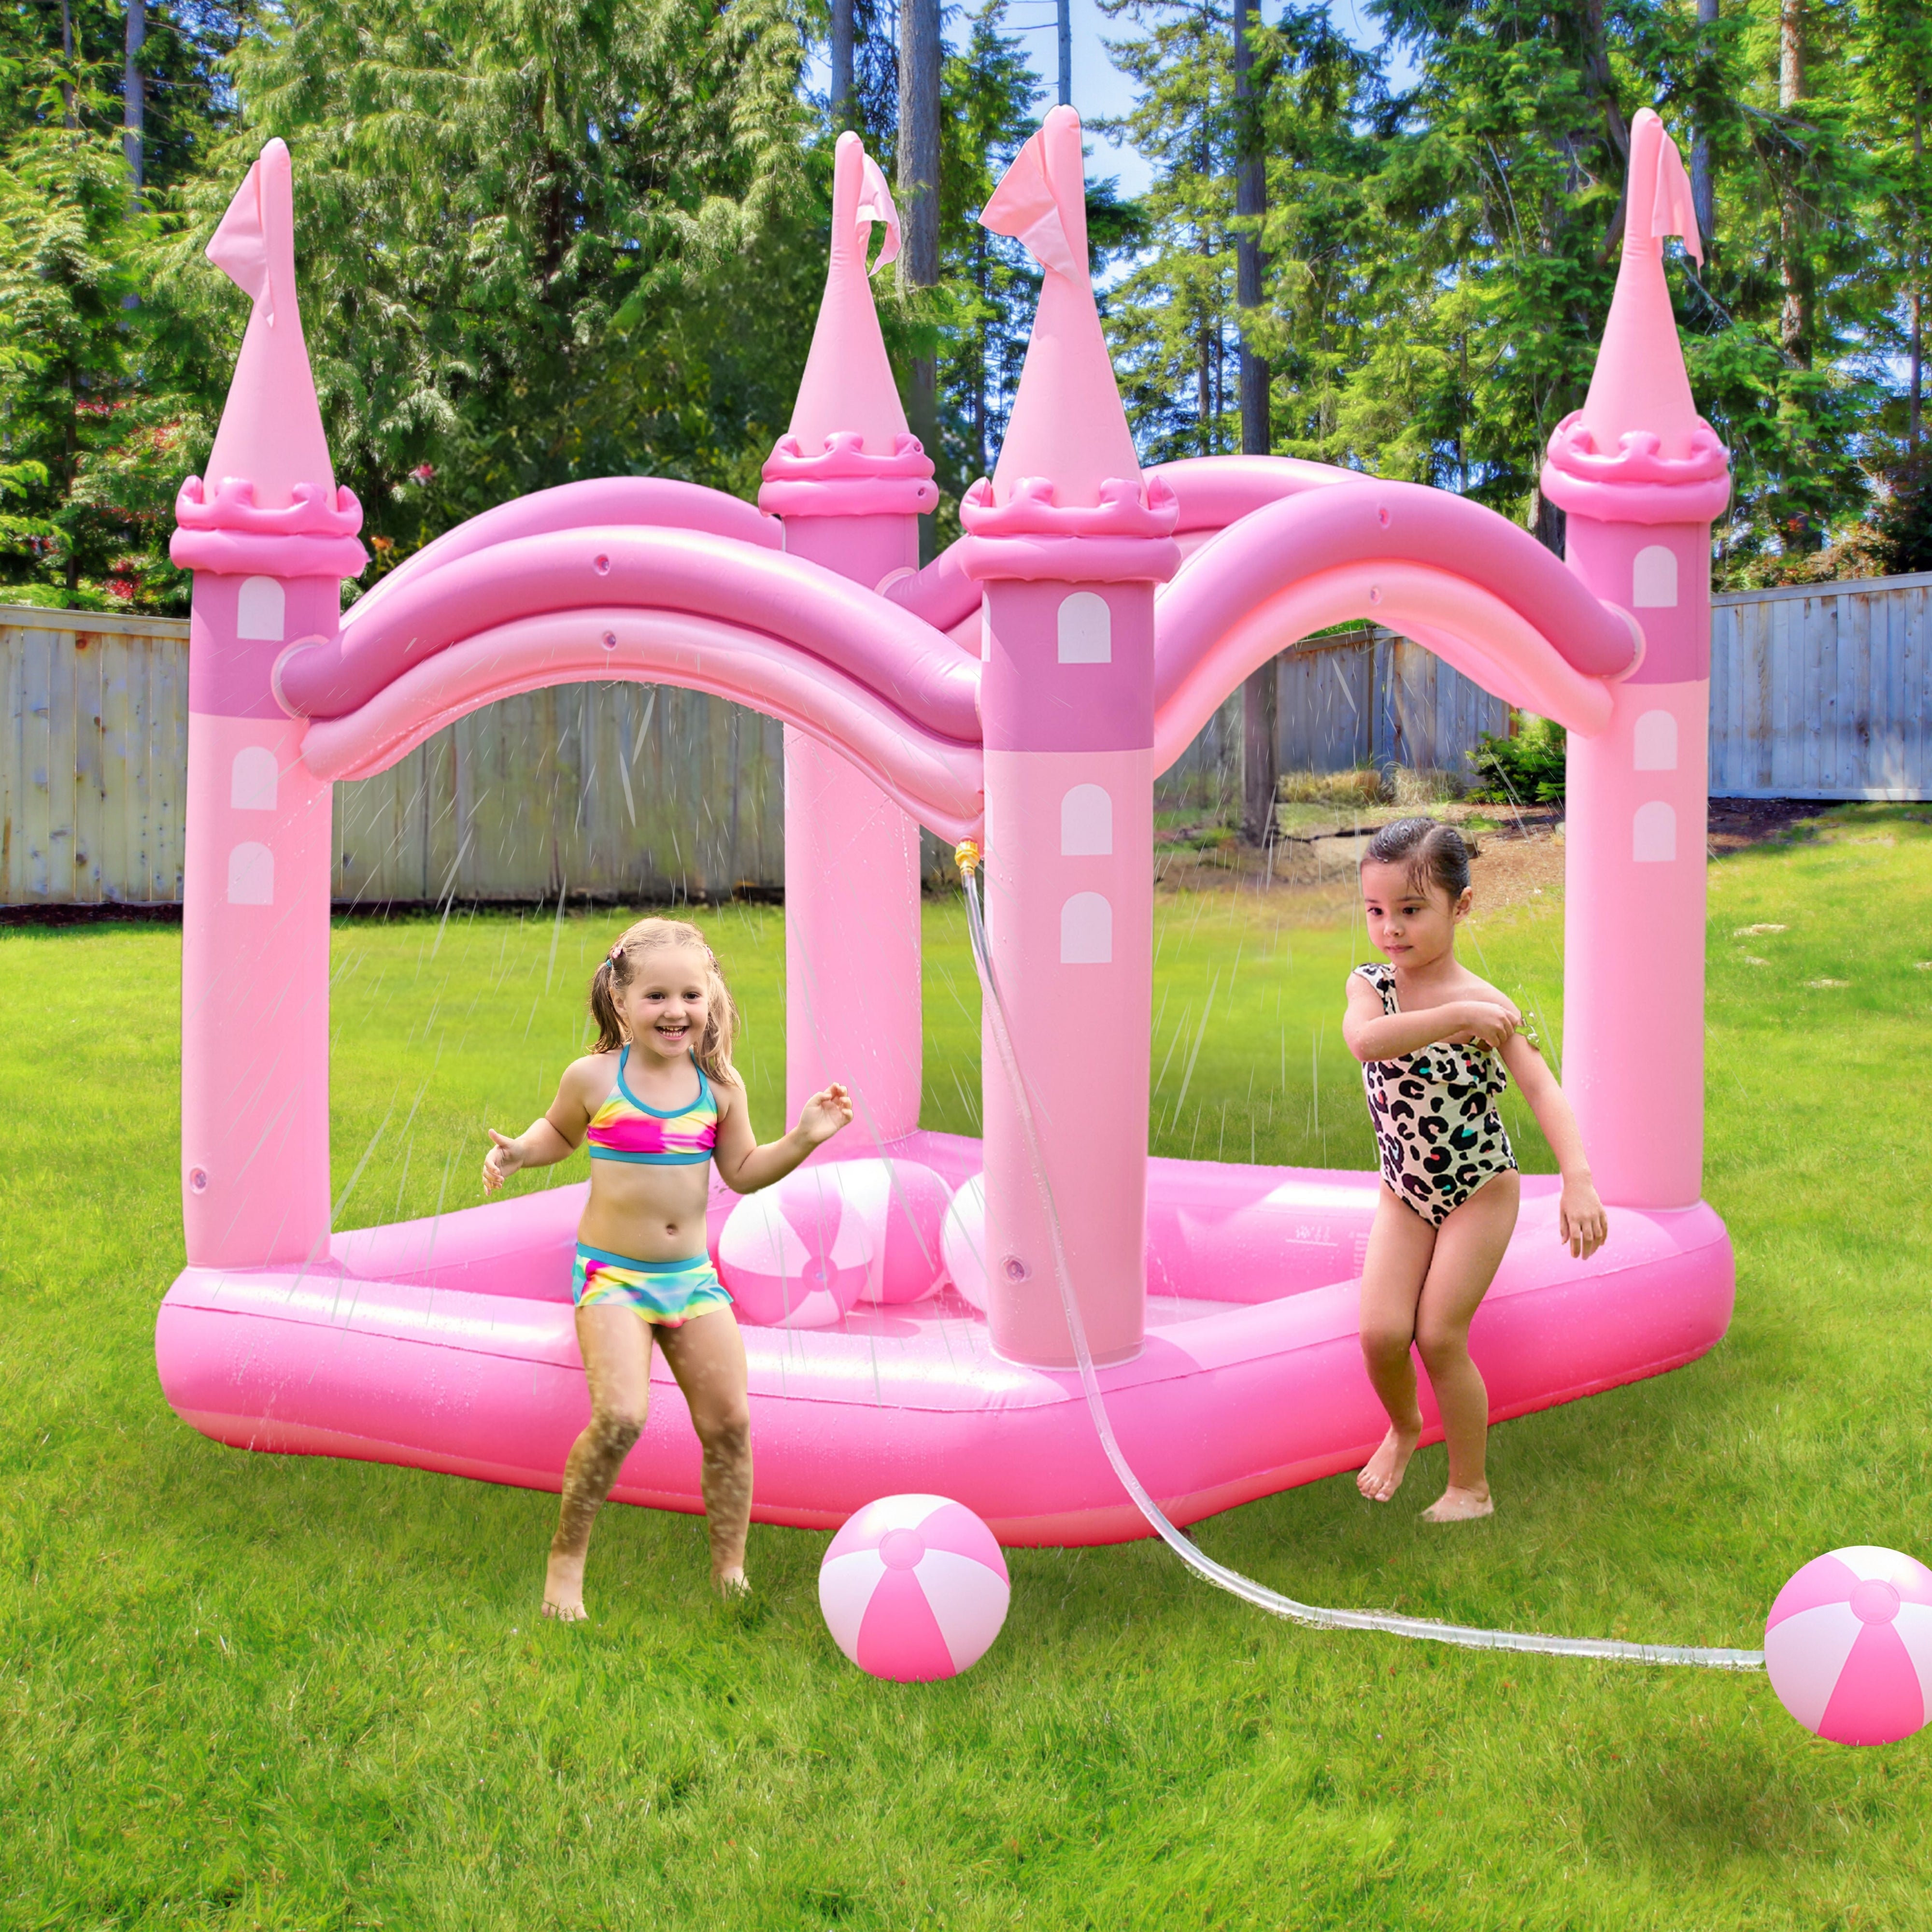 2 kids playing in a pink Inflatable kiddie pool with beach balls in a backyard.